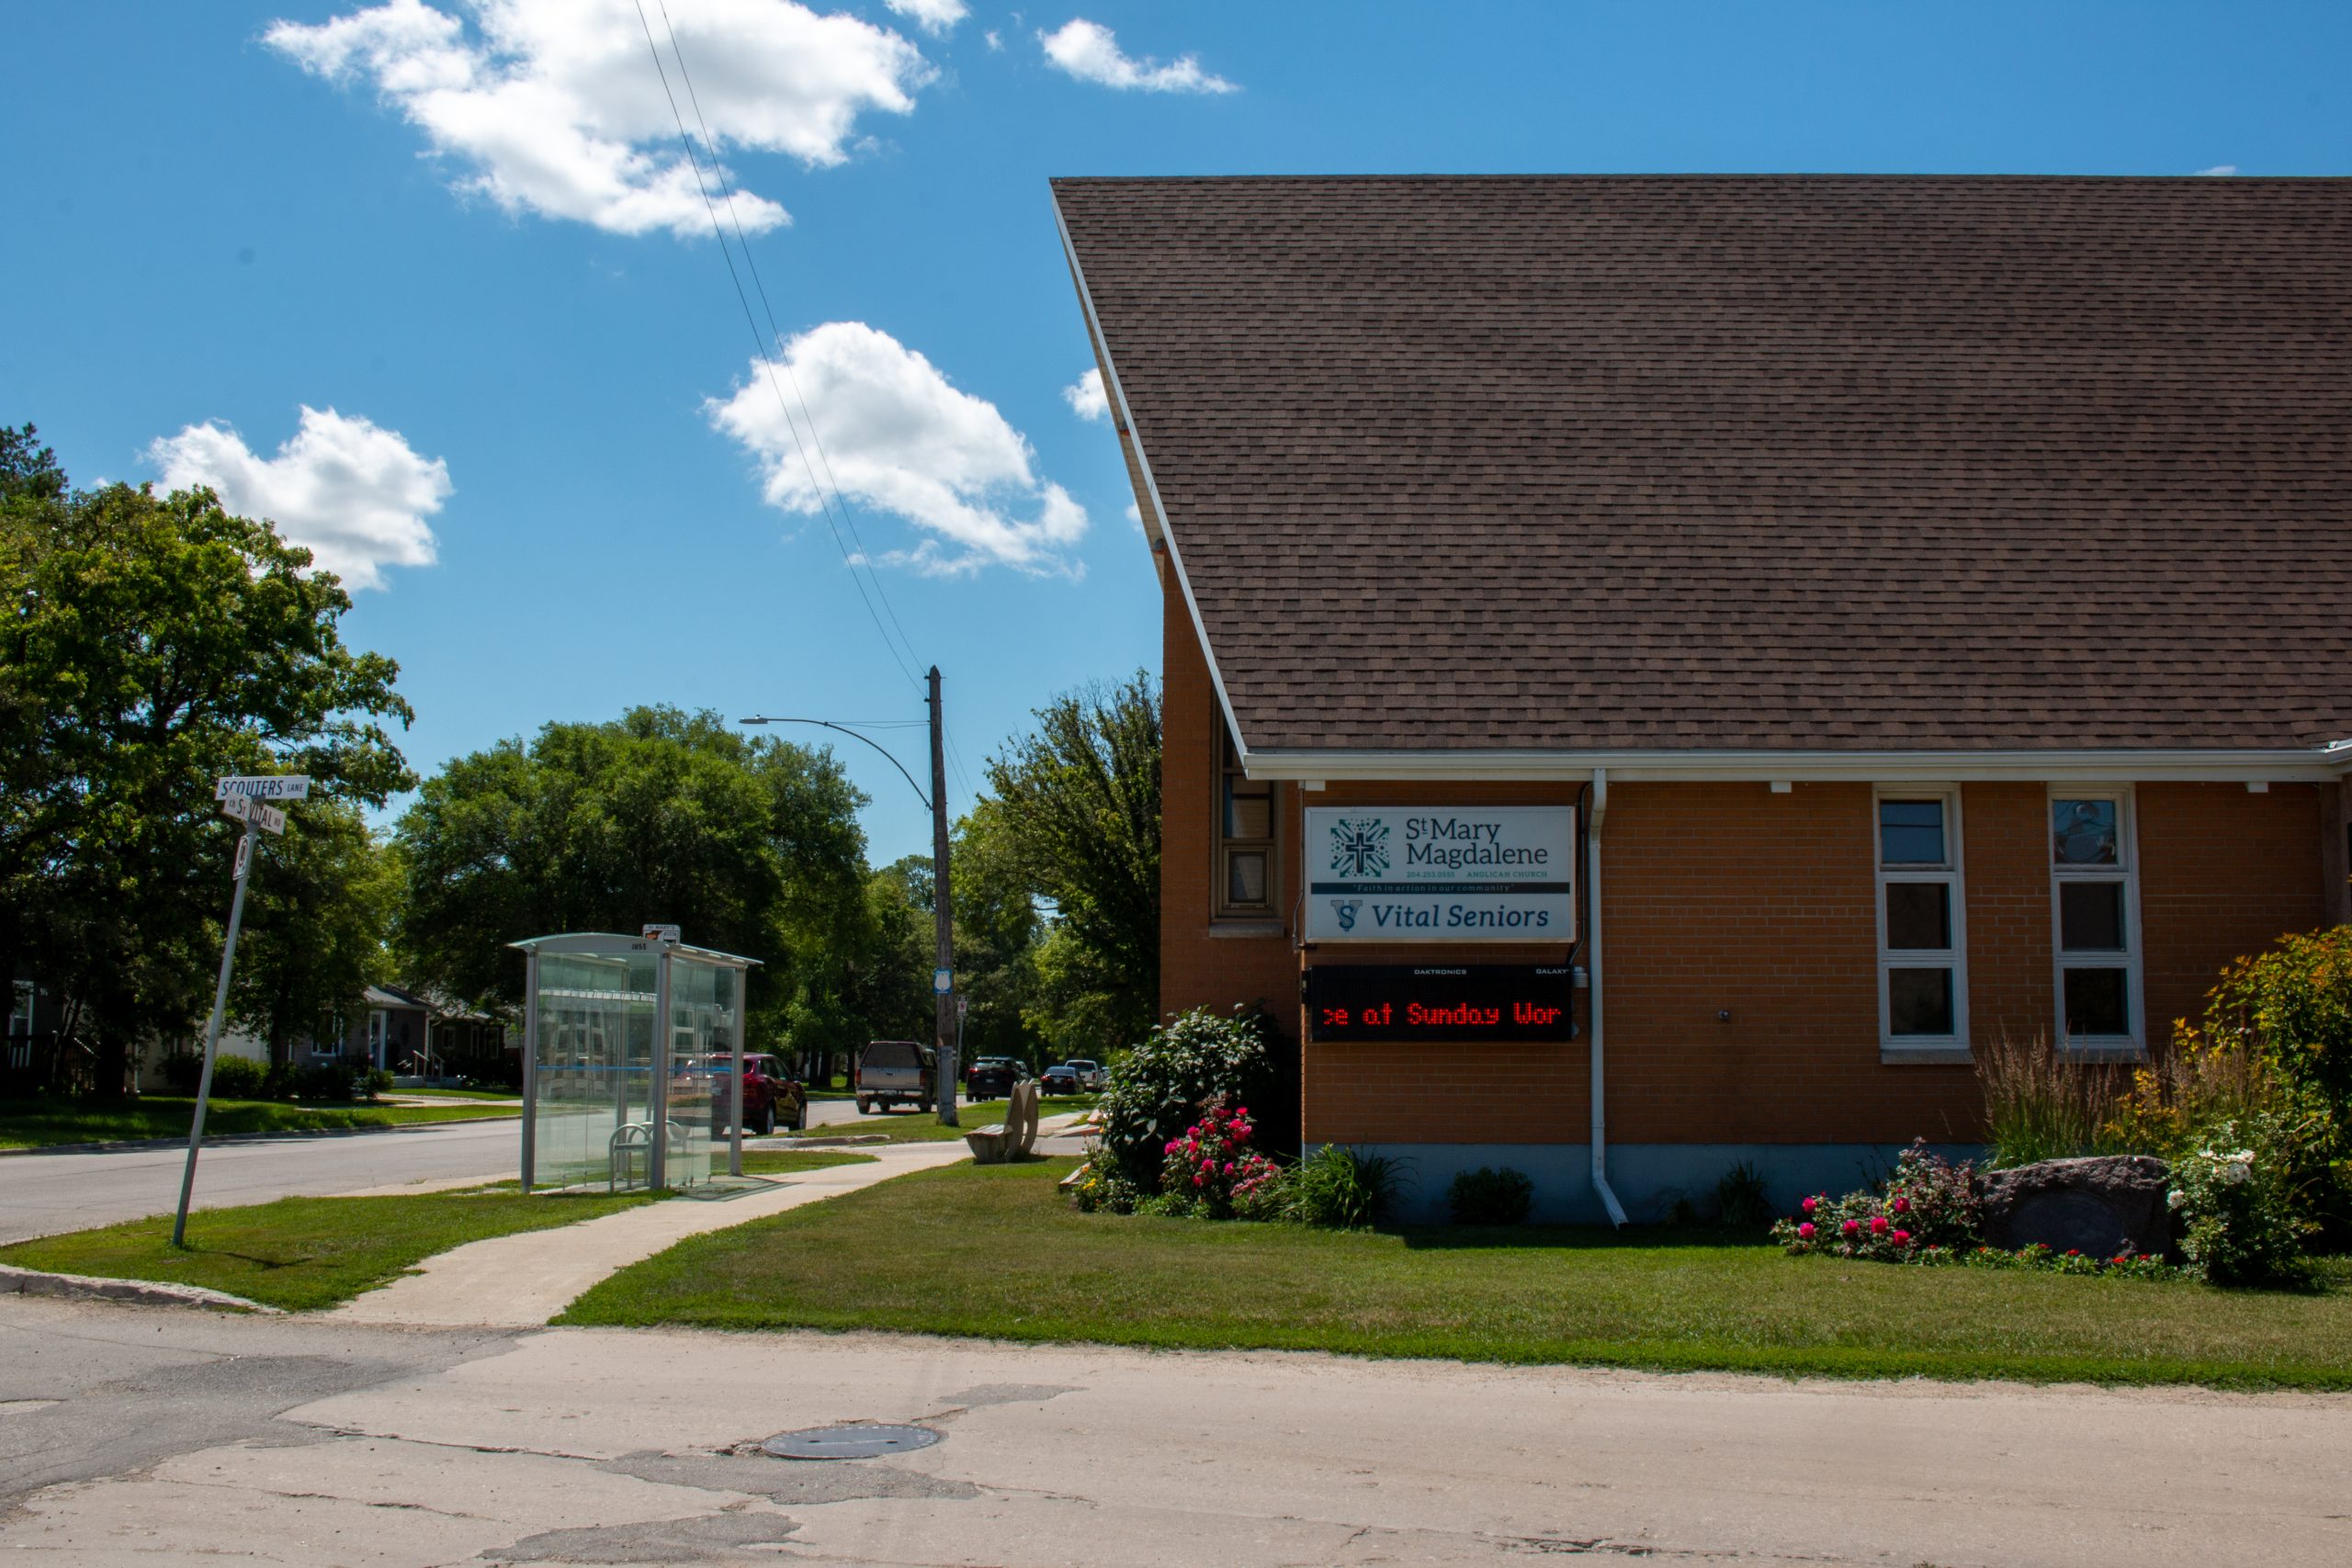 Image of the St. Mary Magdalene Anglican Church at 3 St.Vital Road side view